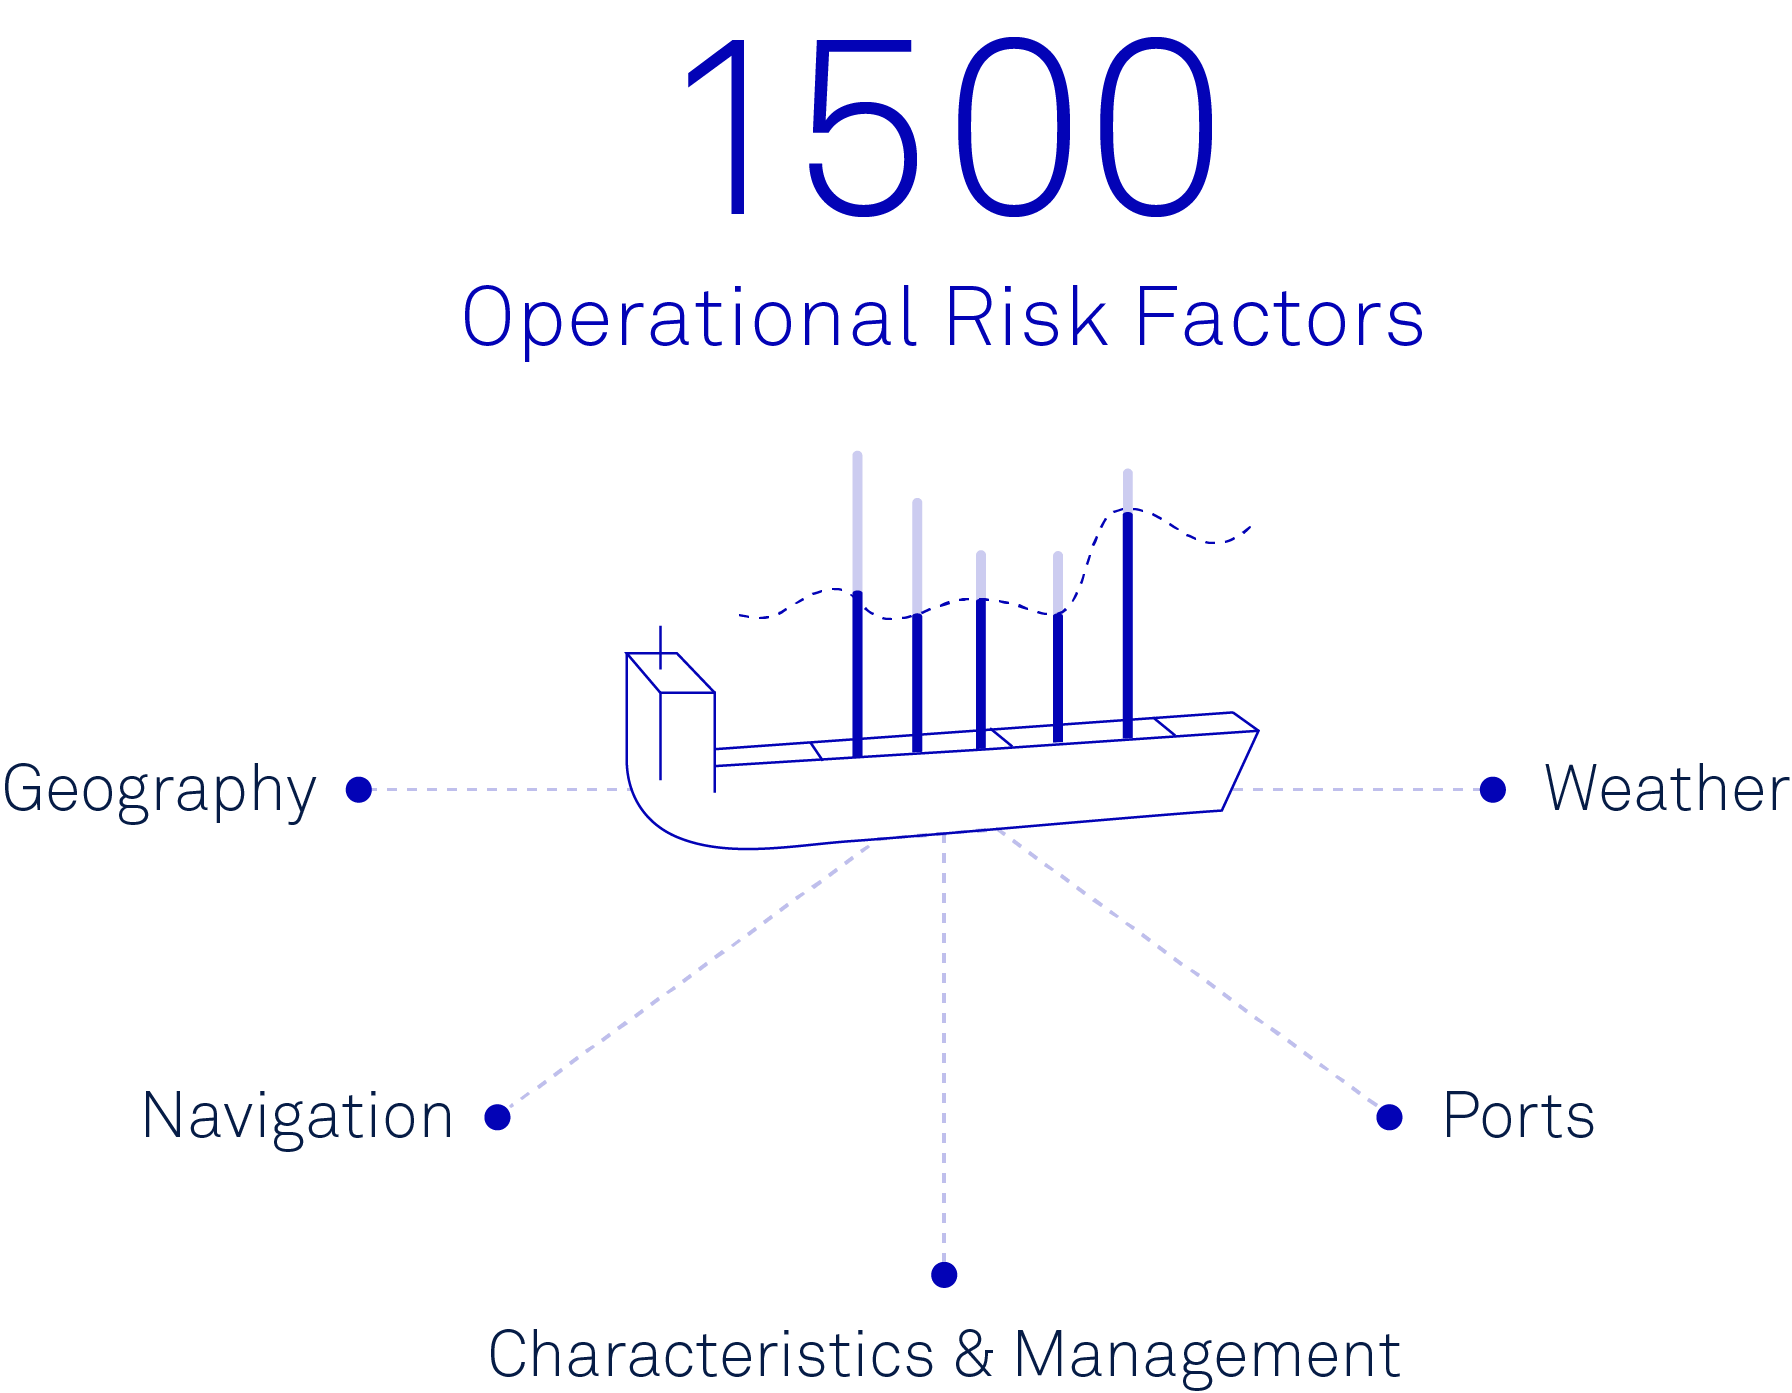 Every vessel has a unique operational profile